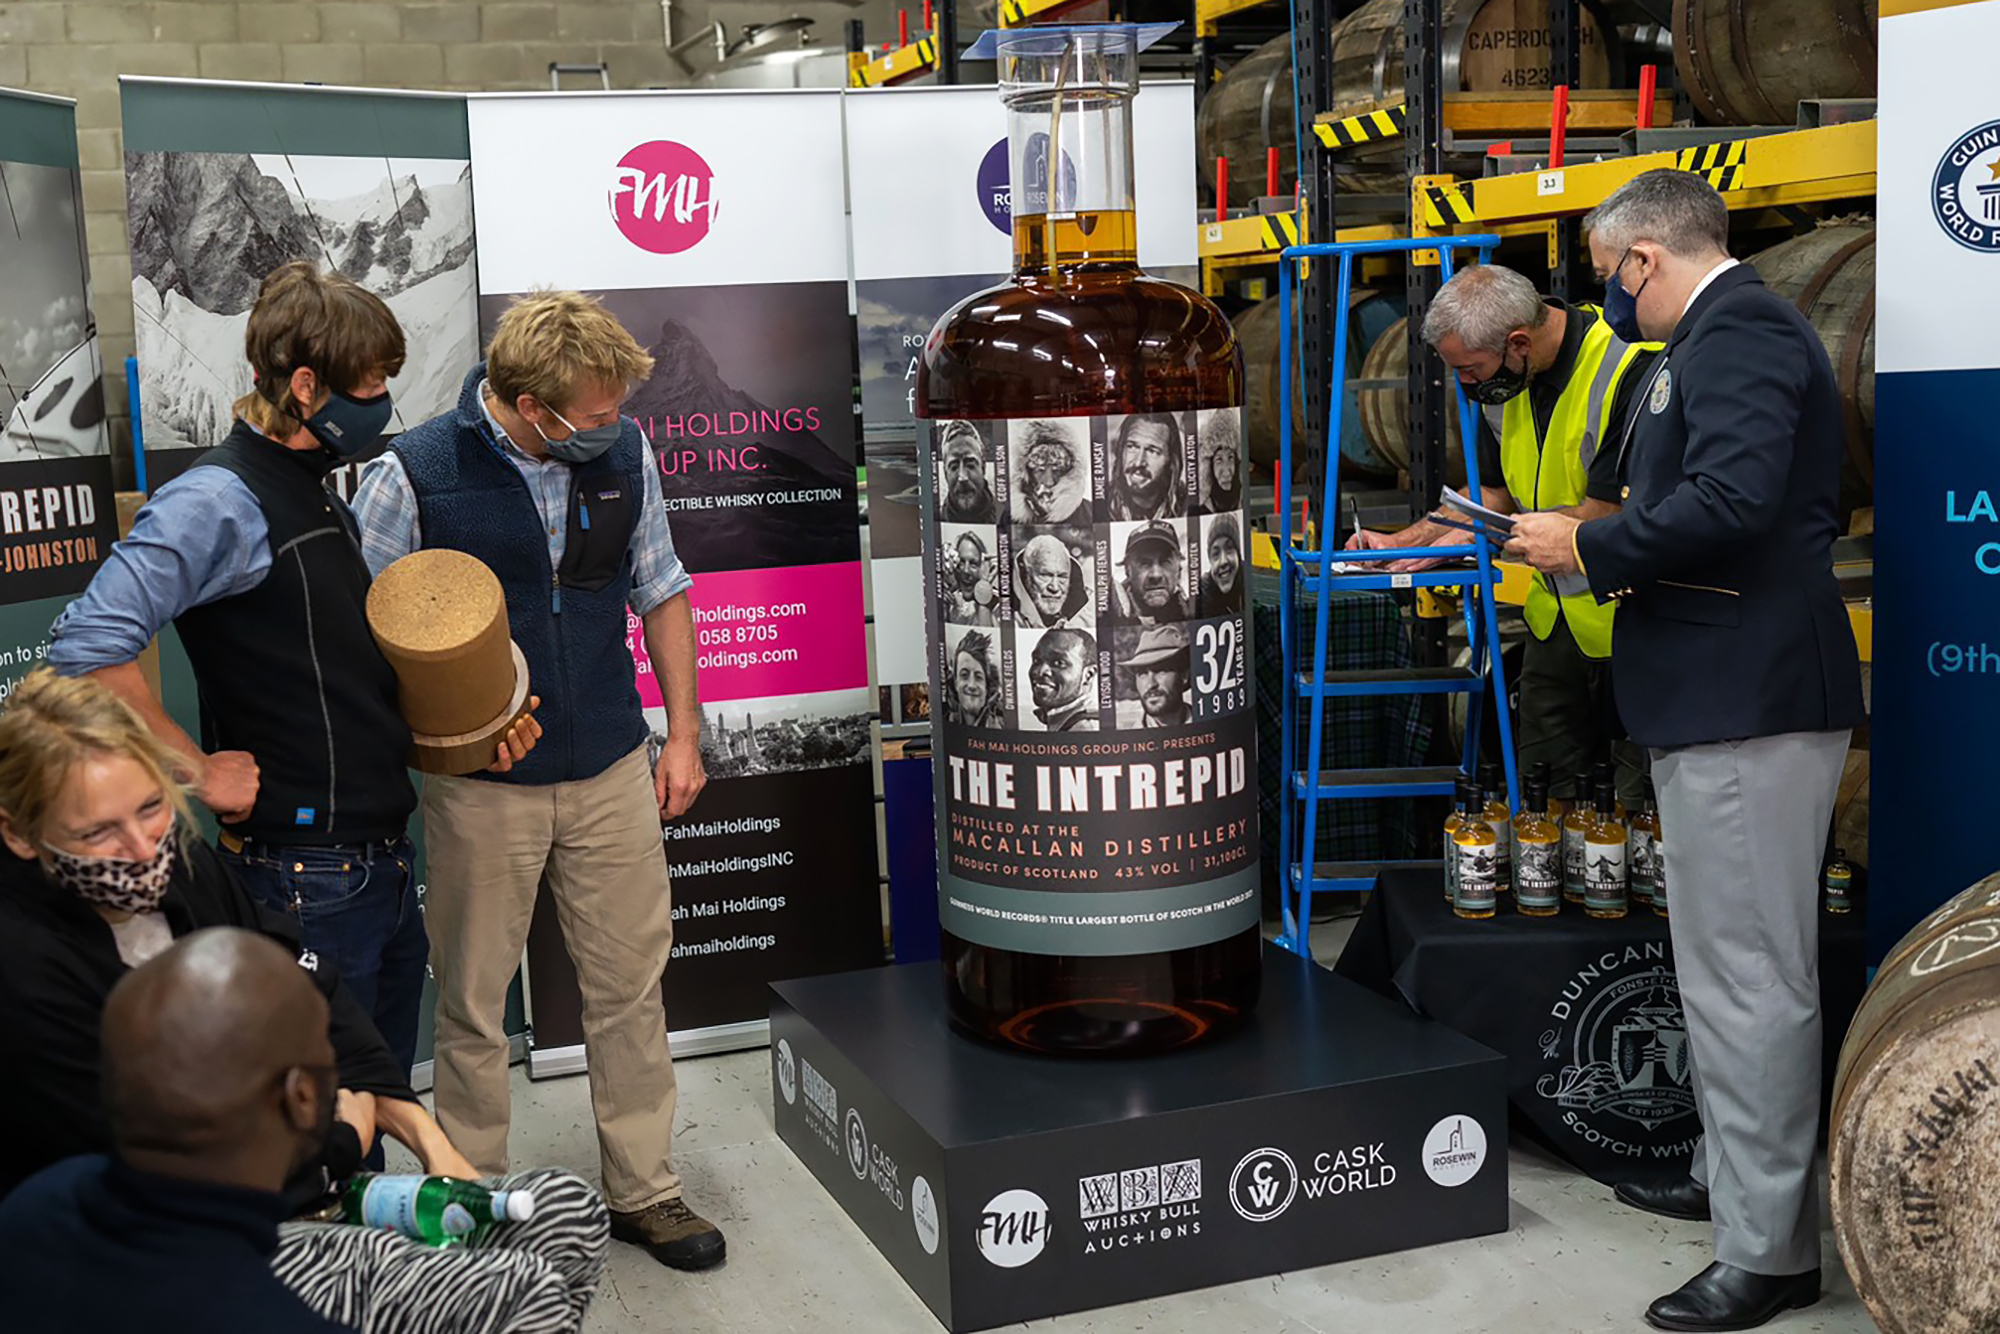 World’s largest bottle of Scotch sold for £1.1m